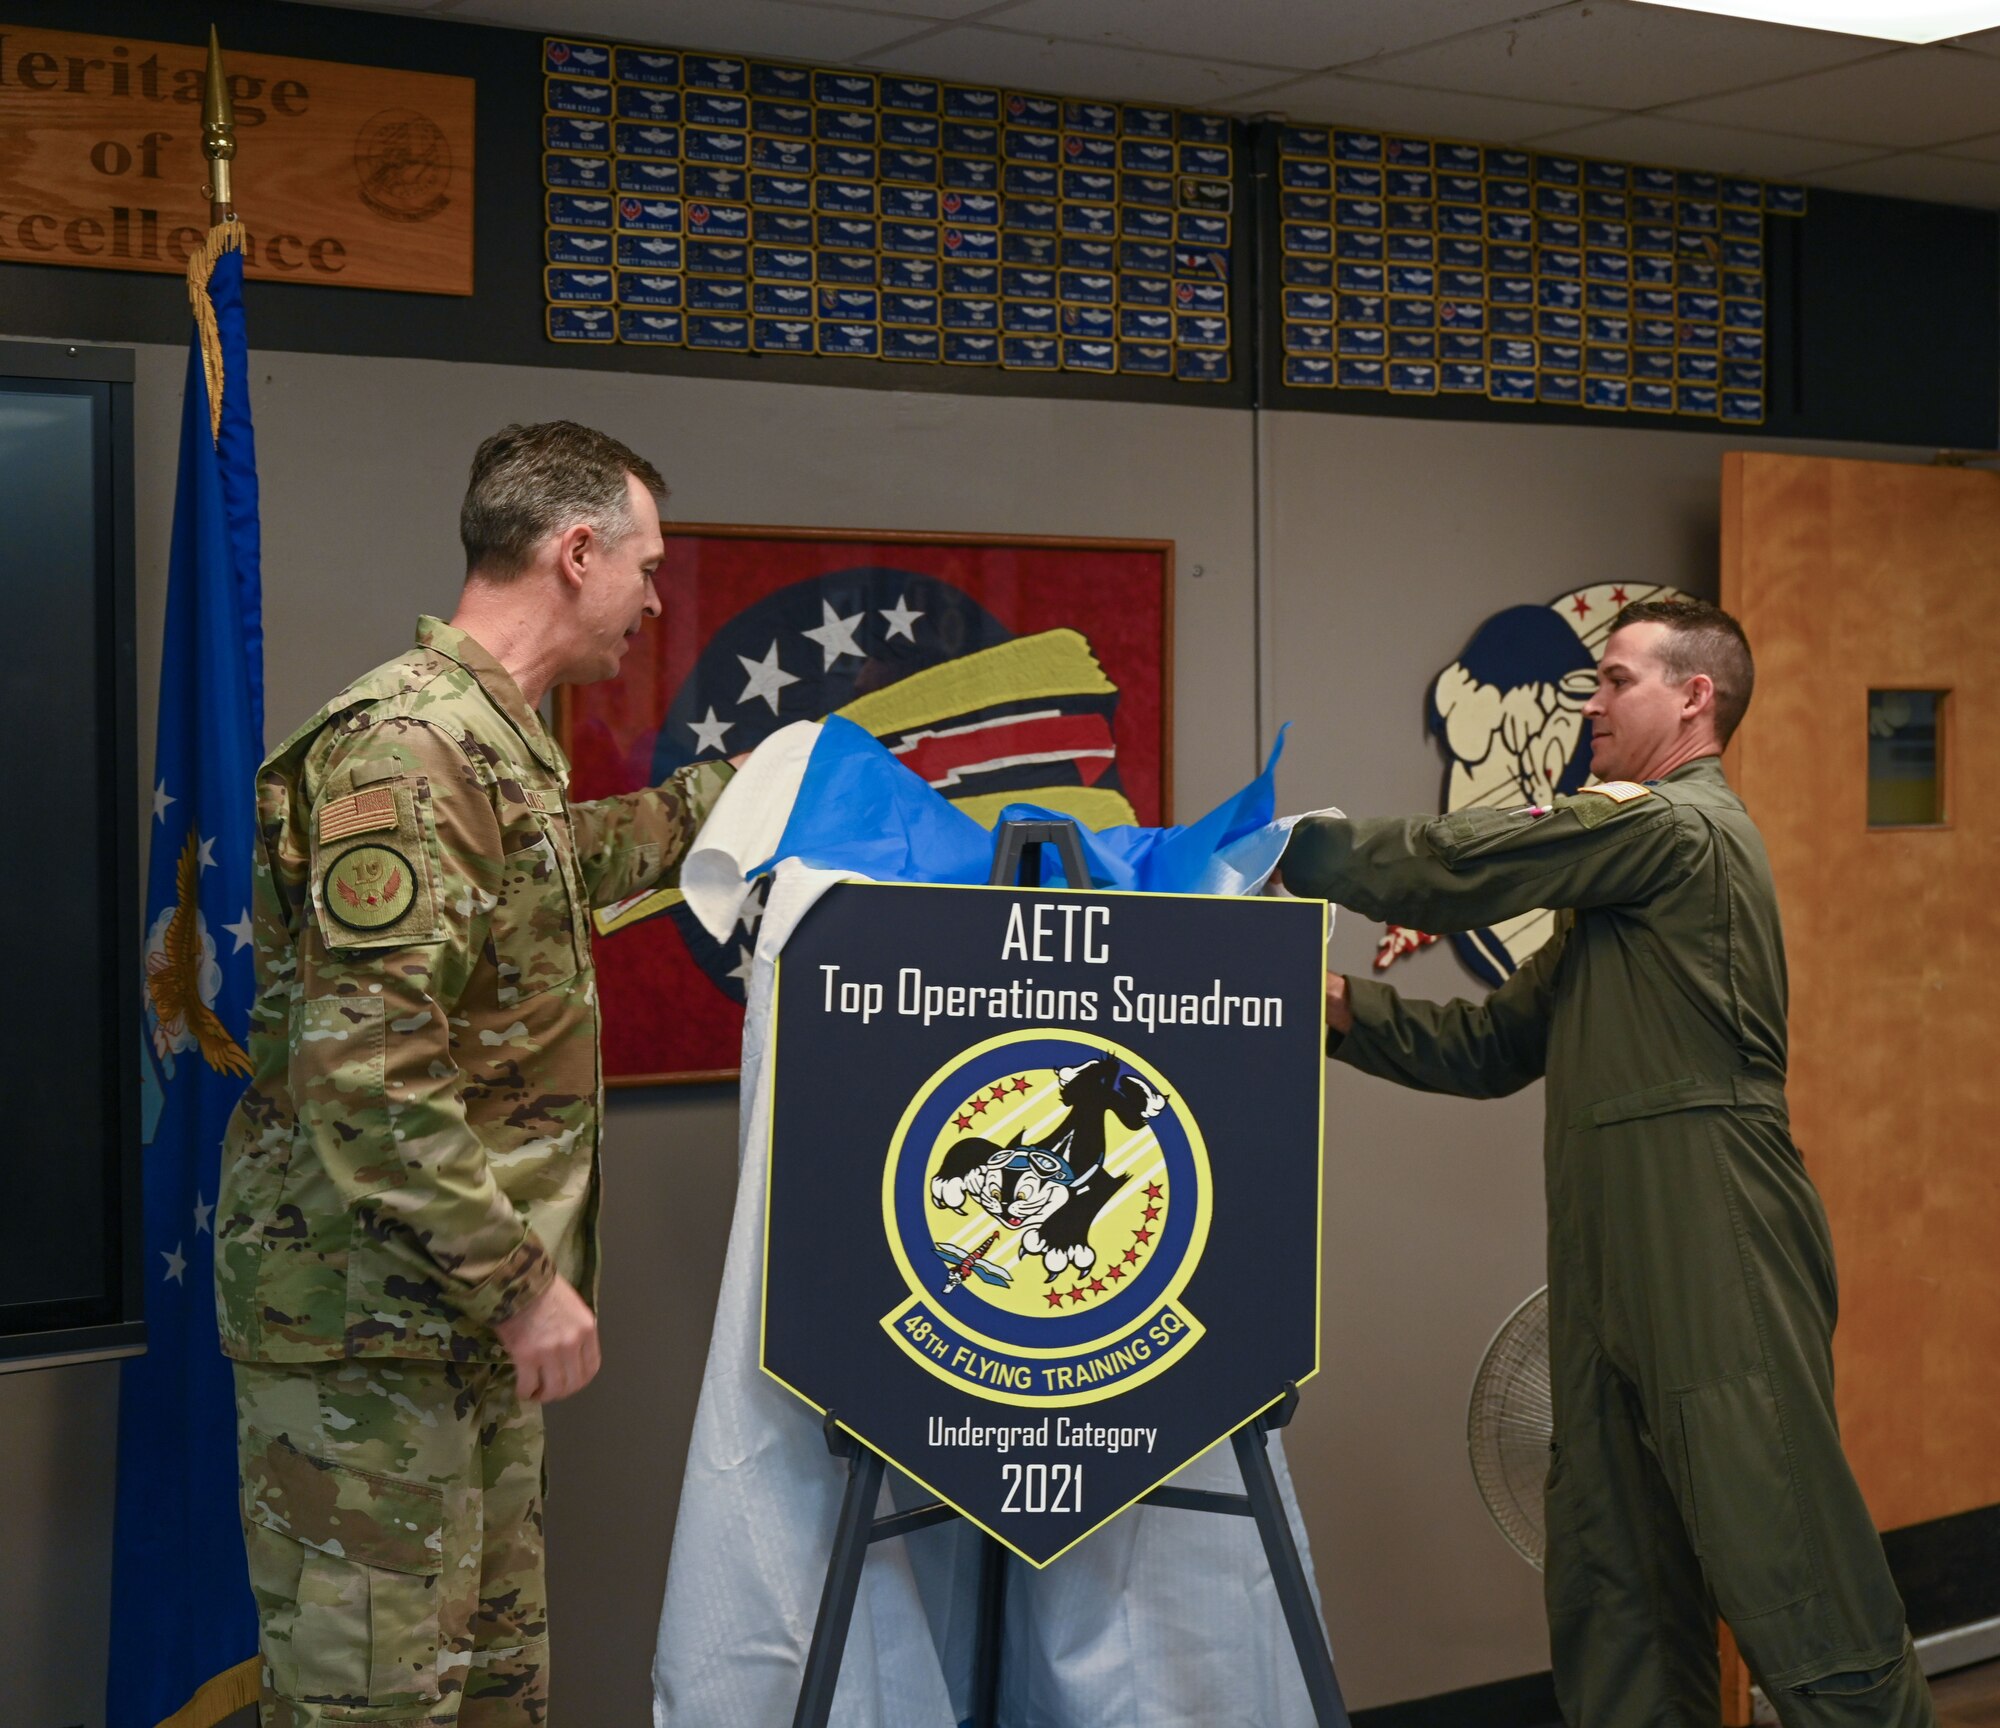 Maj. Gen. Craig D. Wills, 19th Air Force commander, and Lt. Col. Nelson Prouty, 48th Flying Training Squadron commander, unveil a poster to signify the 48th FTS as the Air Education and Training Command’s top operations squadron for 2021 on April 20, 2022, at Columbus Air Force Base, Miss. The mission of the 48th FTS is to develop professional military officers while empowering instructors to train pilots for the world’s greatest Air Force. (U.S. Air Force photo by Senior Airman Davis Donaldson)